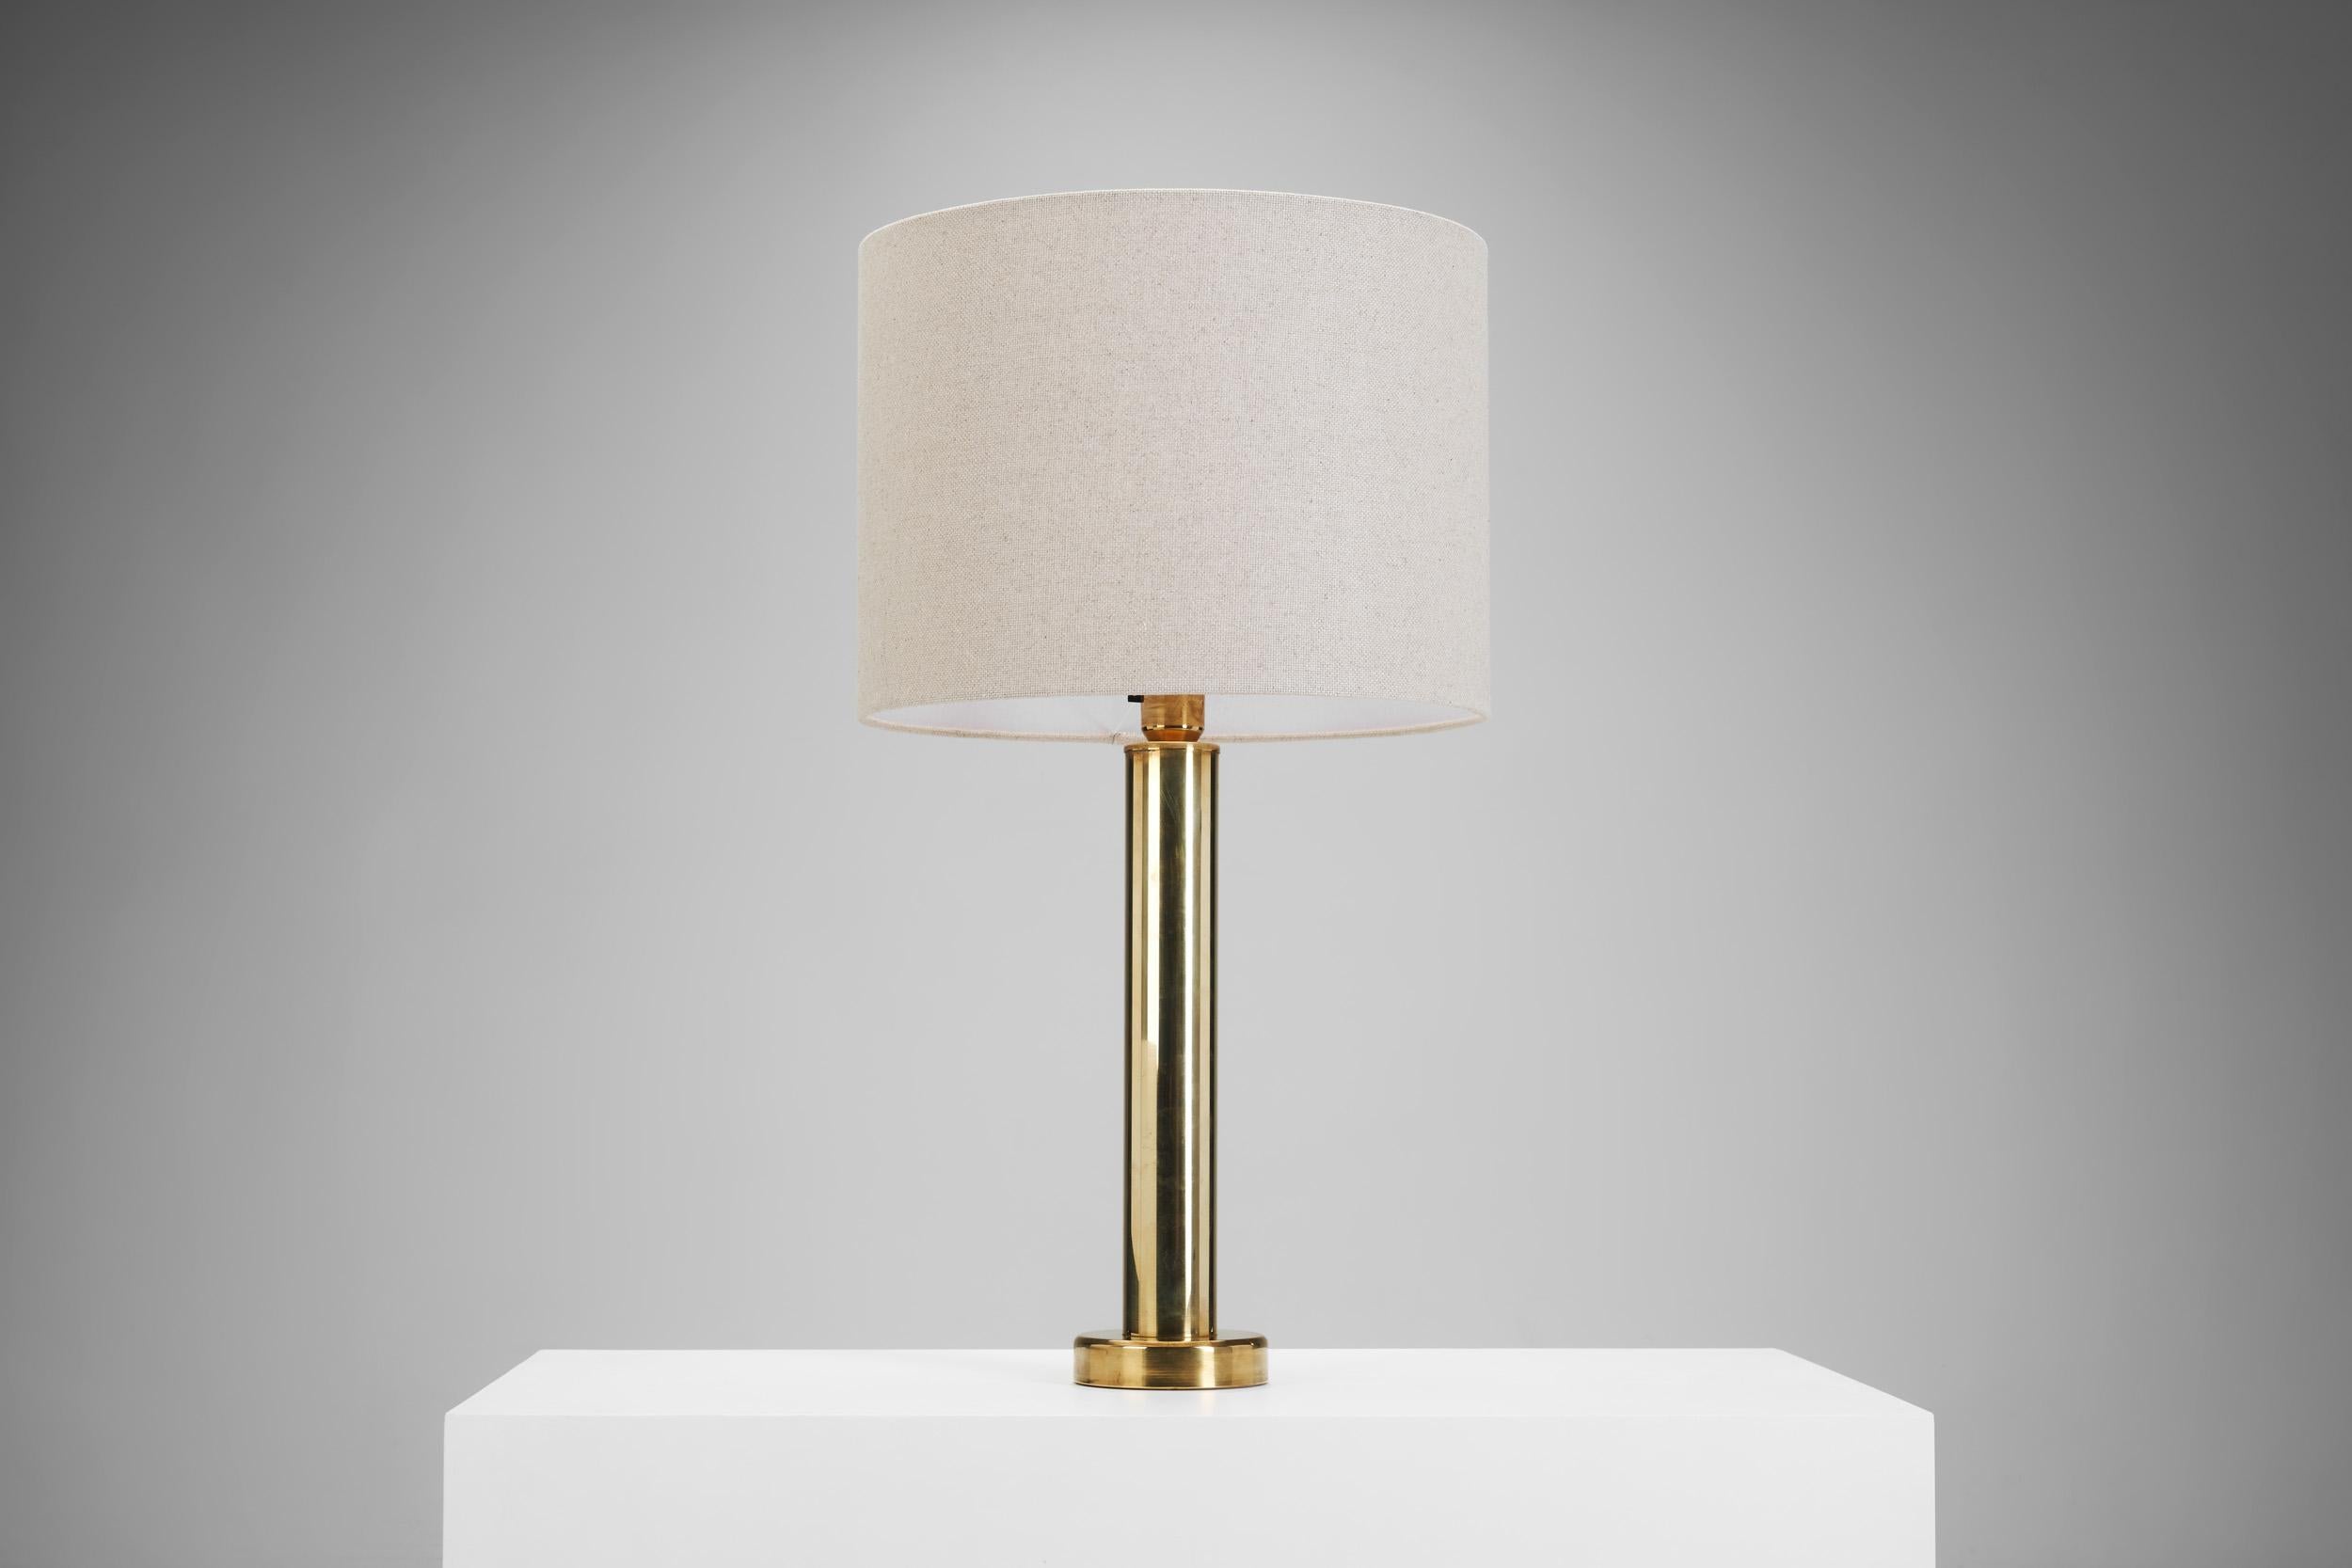 Large Swedish Modern Brass Table Lamps by Kosta Elarmatur, Sweden ca 1960s For Sale 3